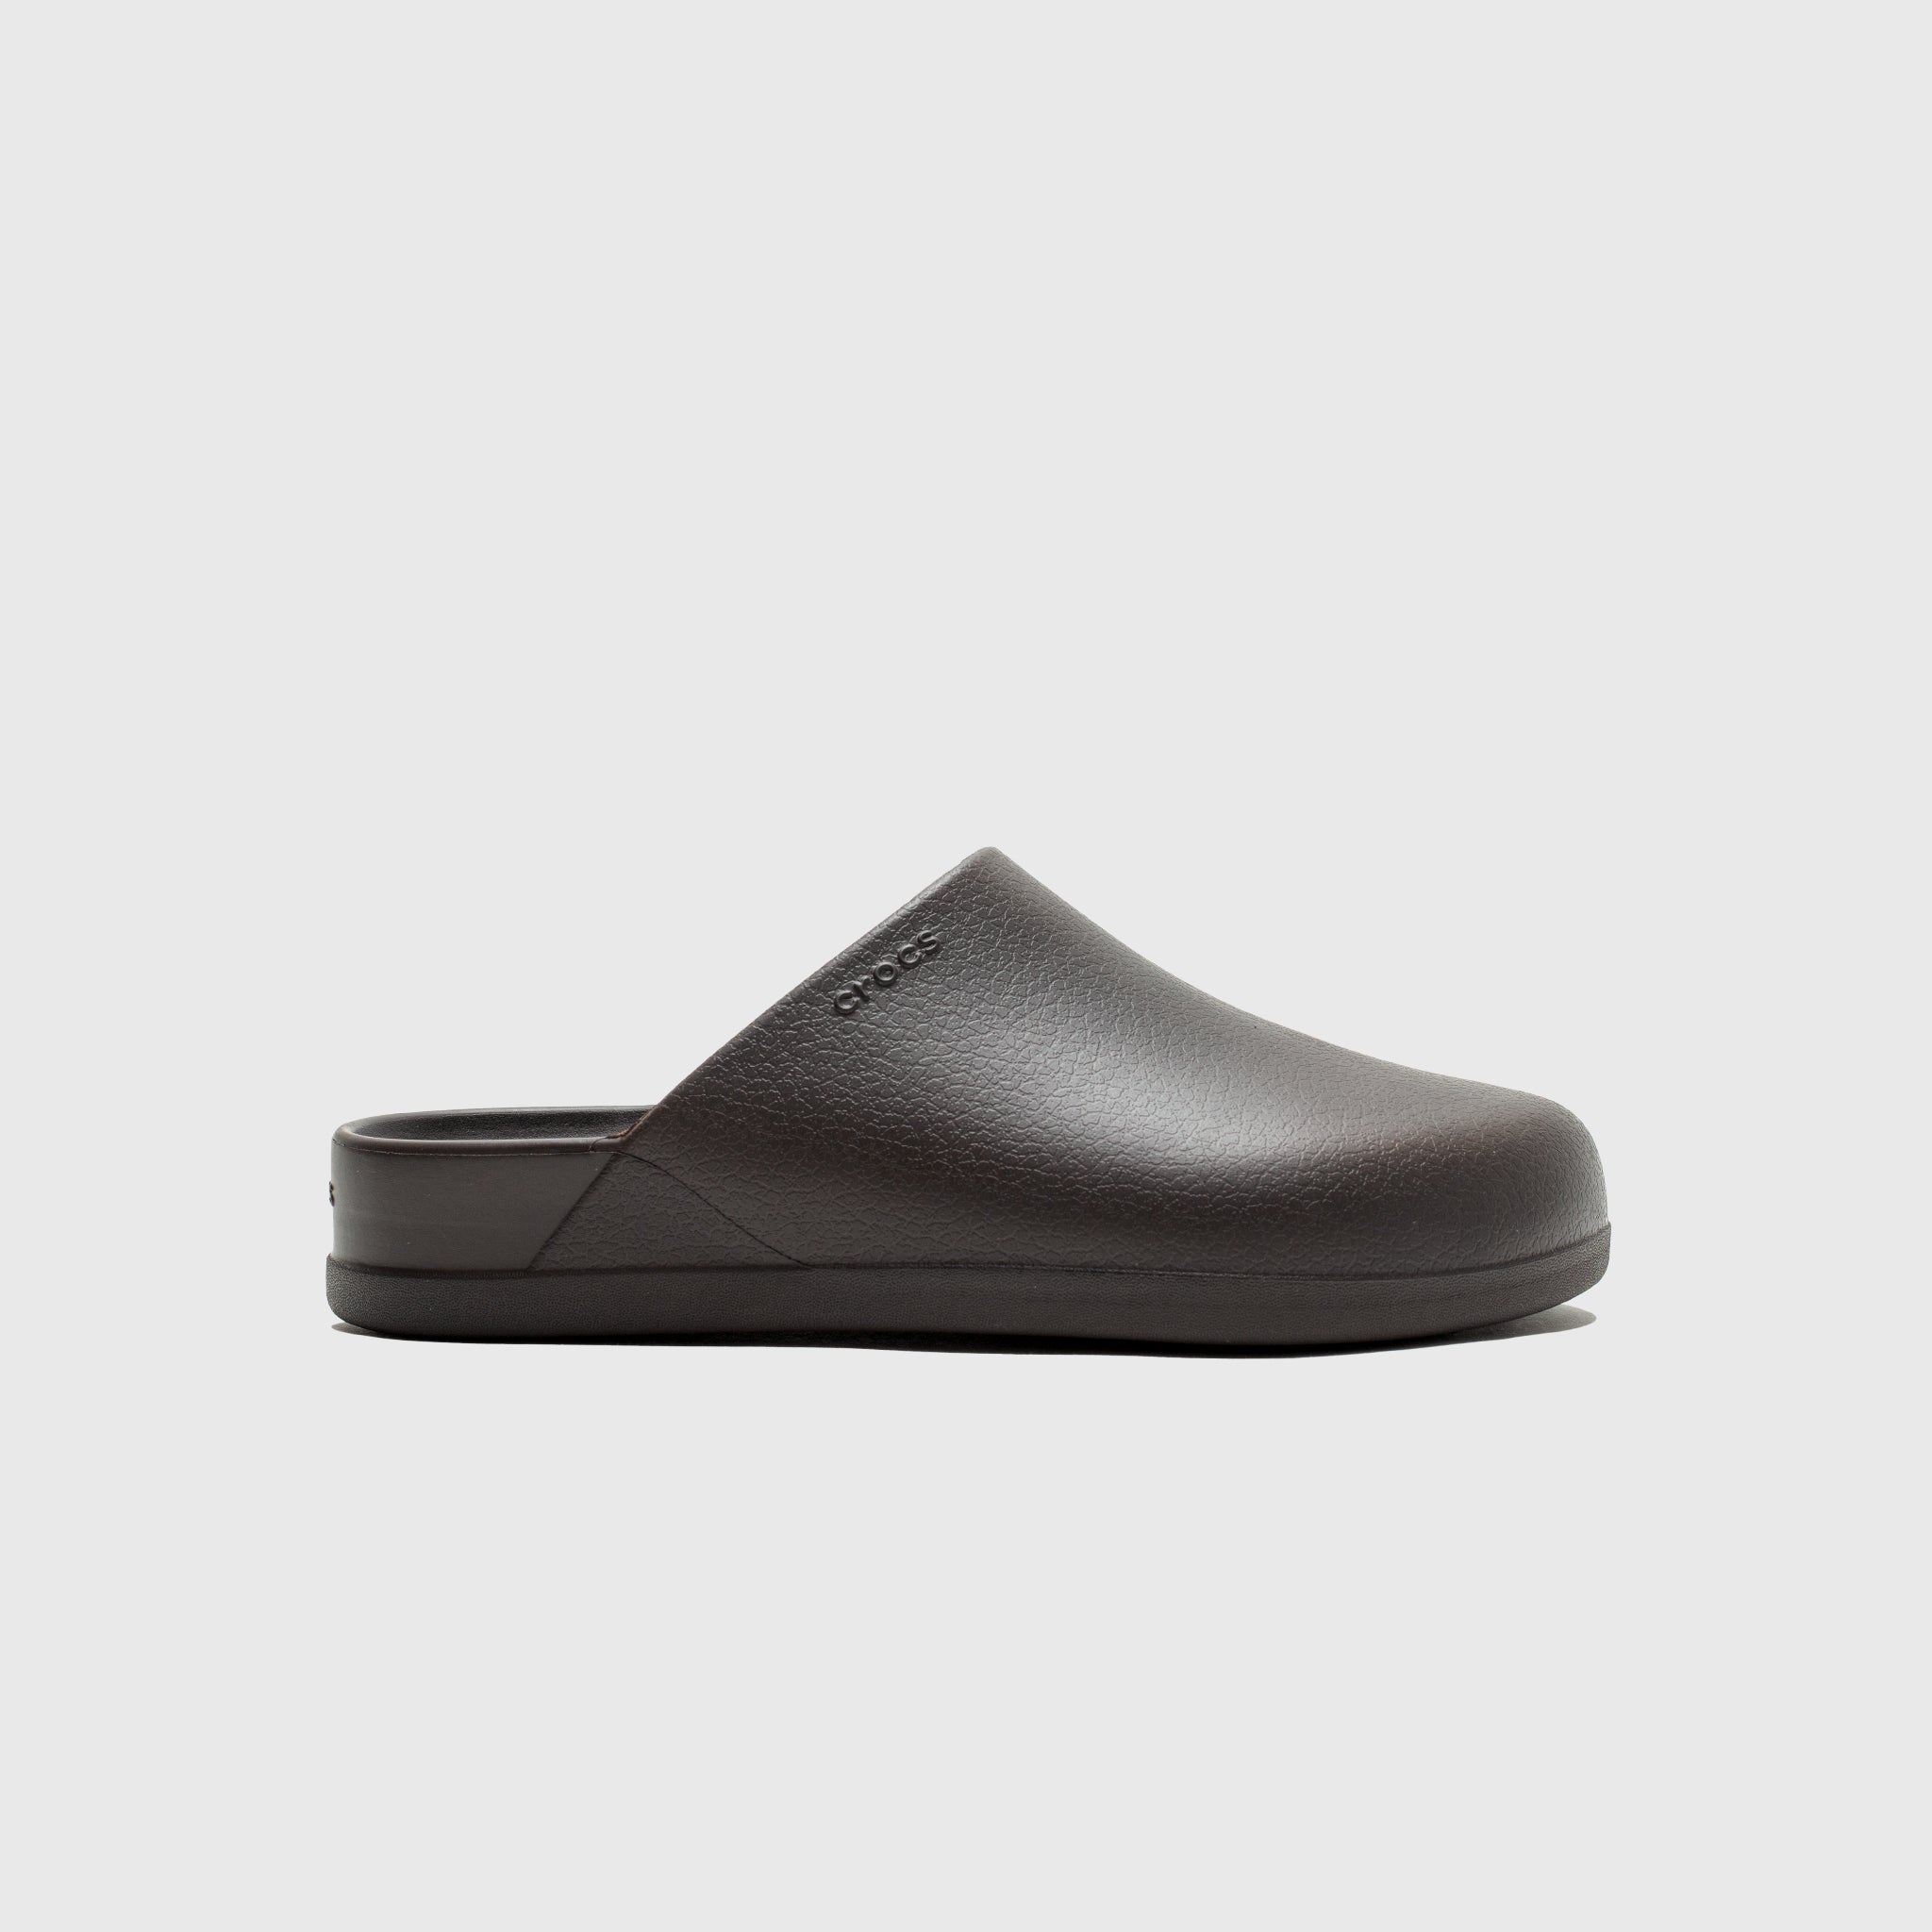 Chef Shoes - Crocs Comfortable Kitchen Shoes Online In India